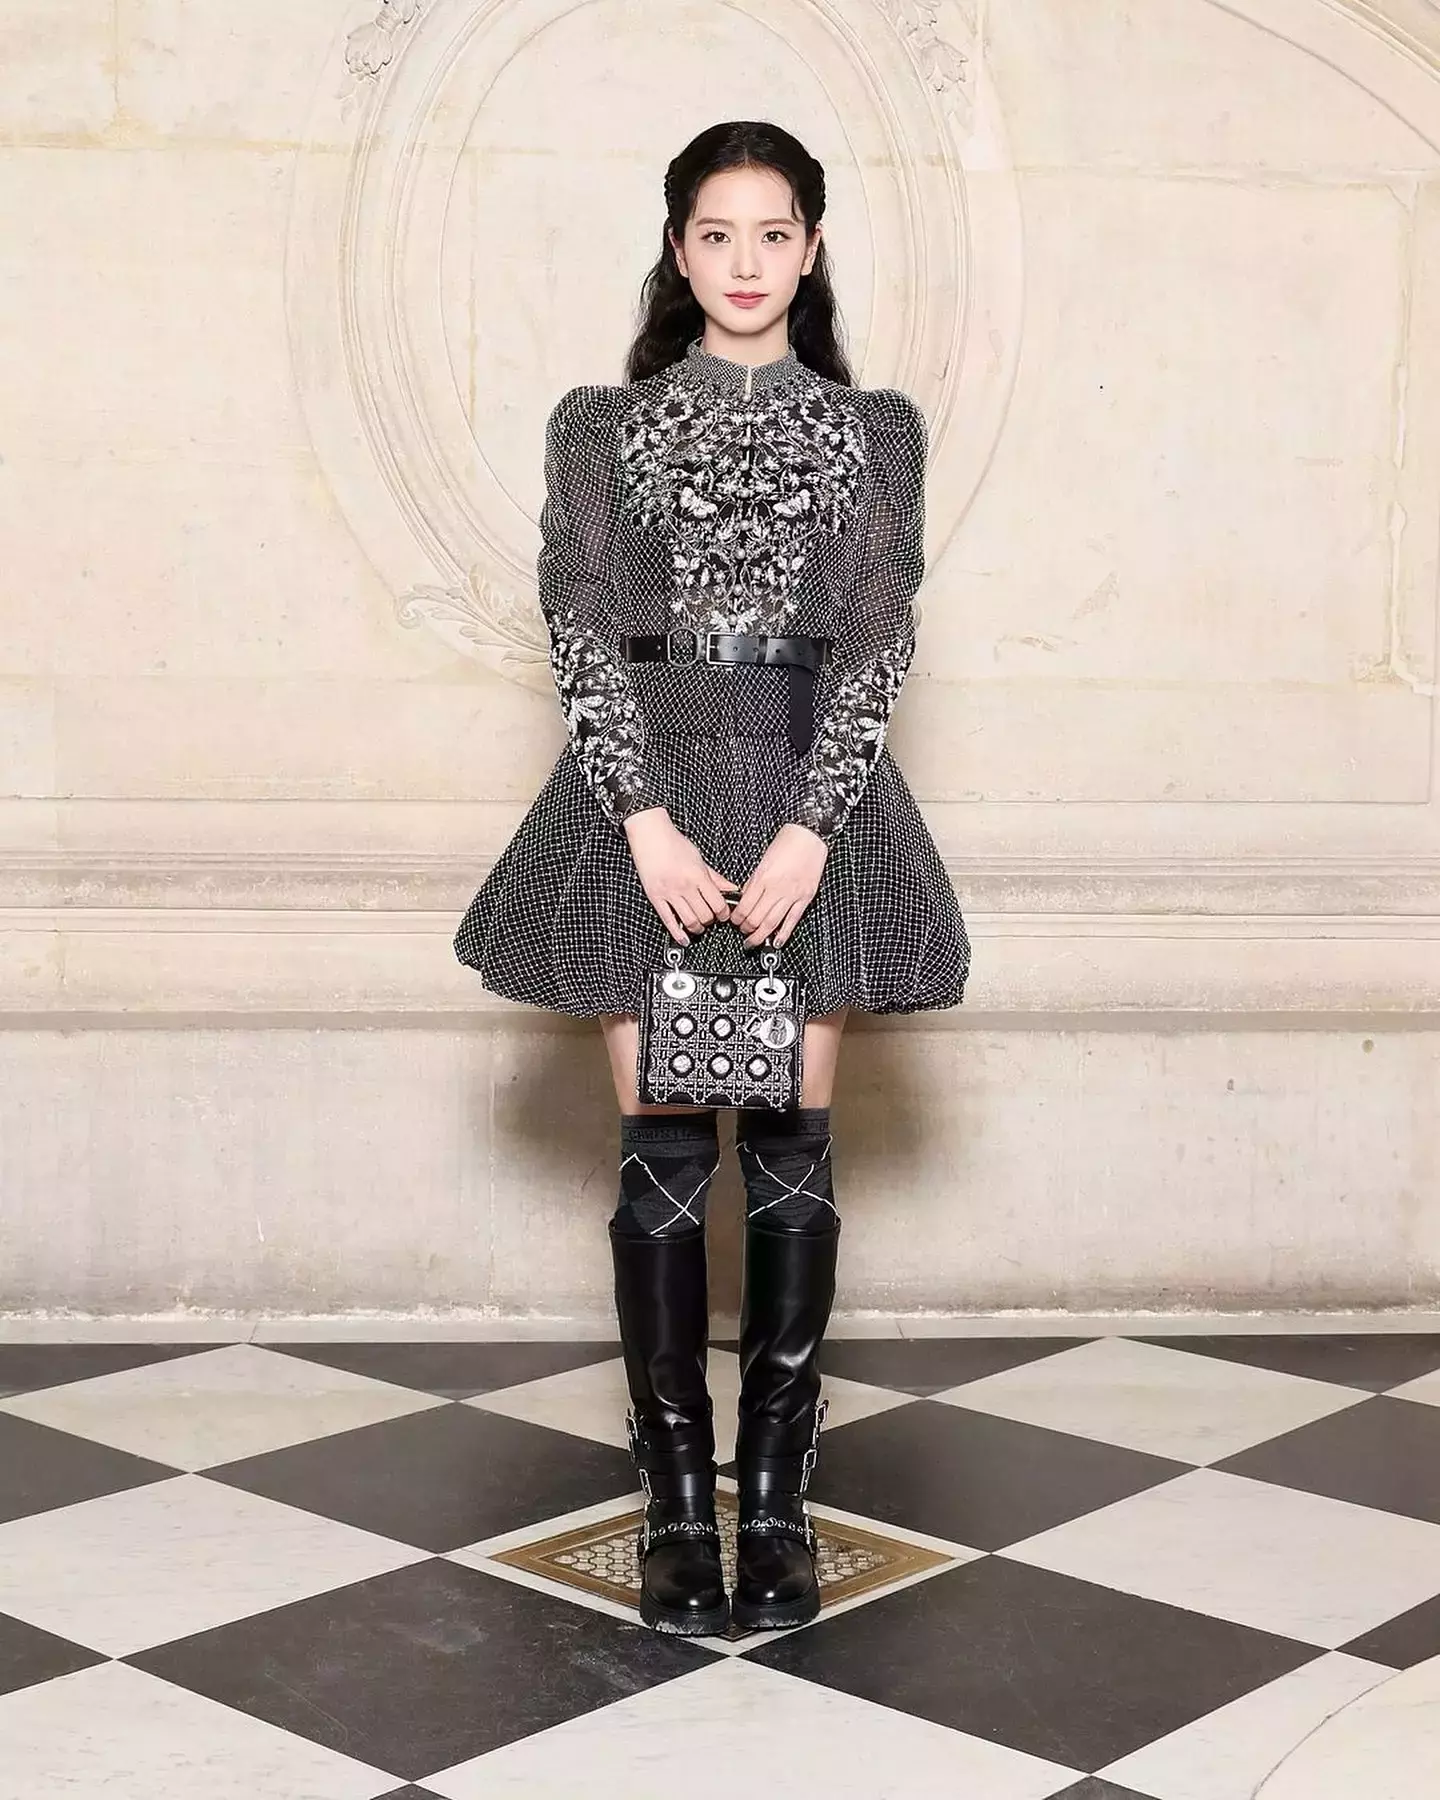 Jisoo Dazzles In Dior Resort At The Dior Couture Show